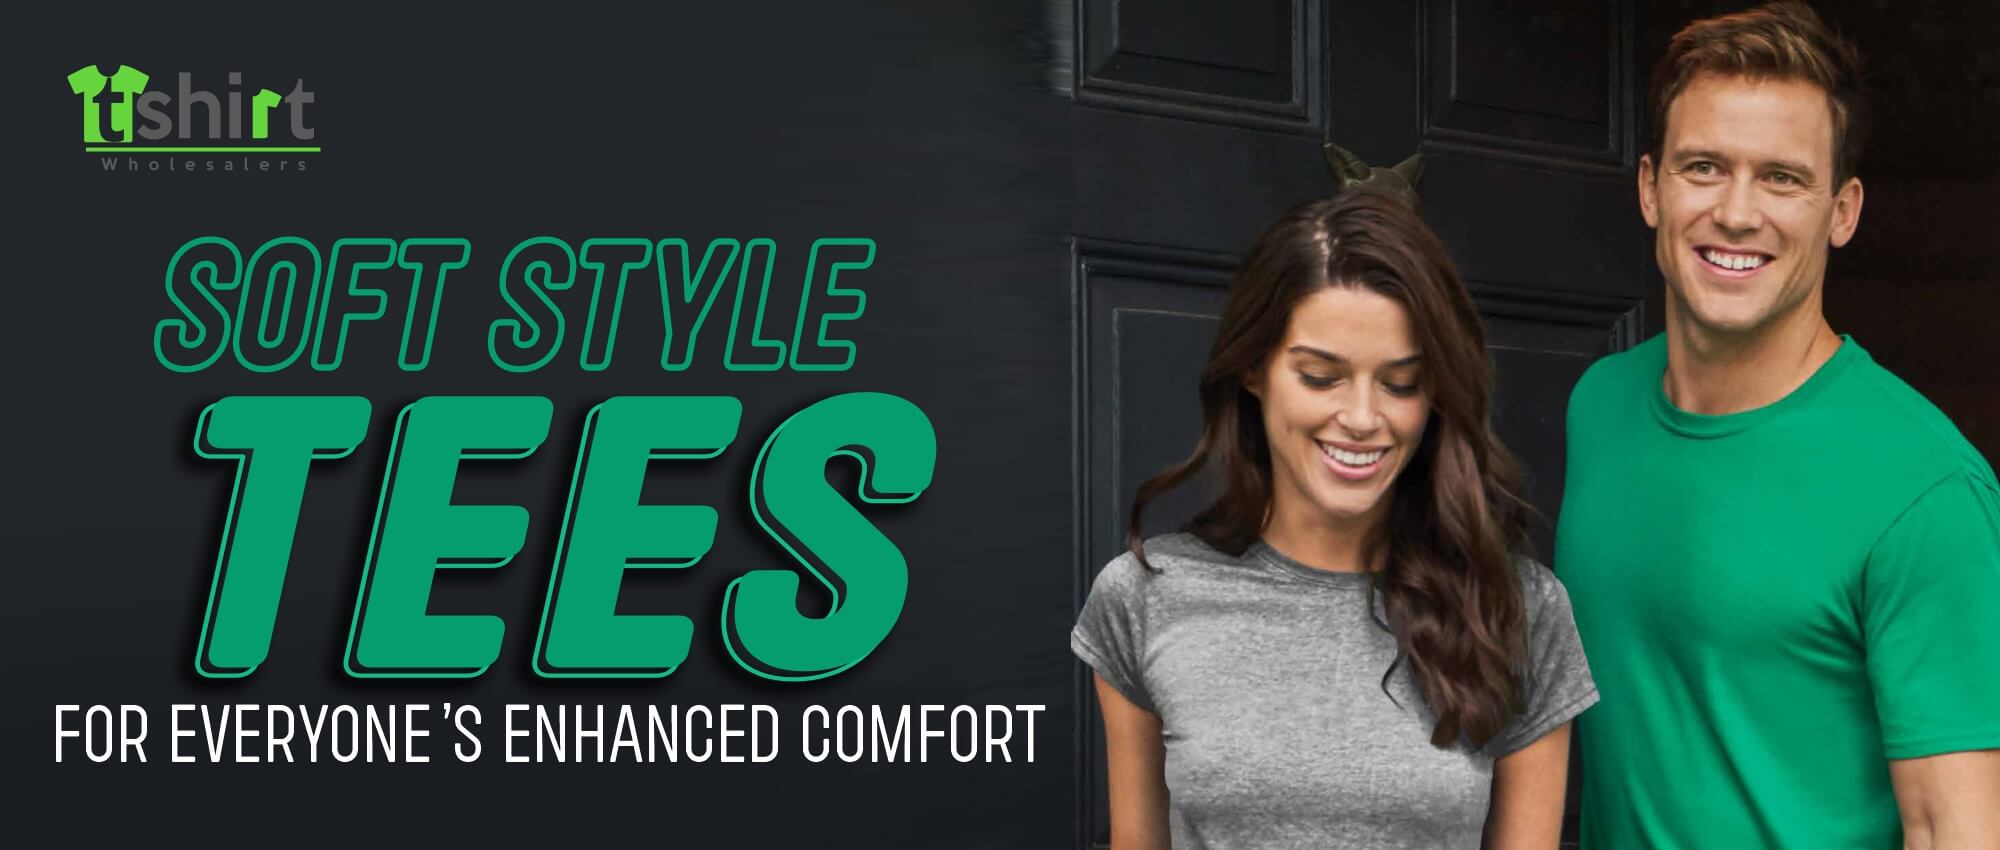 SOFT STYLE TEES FOR EVERYONE'S ENHANCED COMFORT